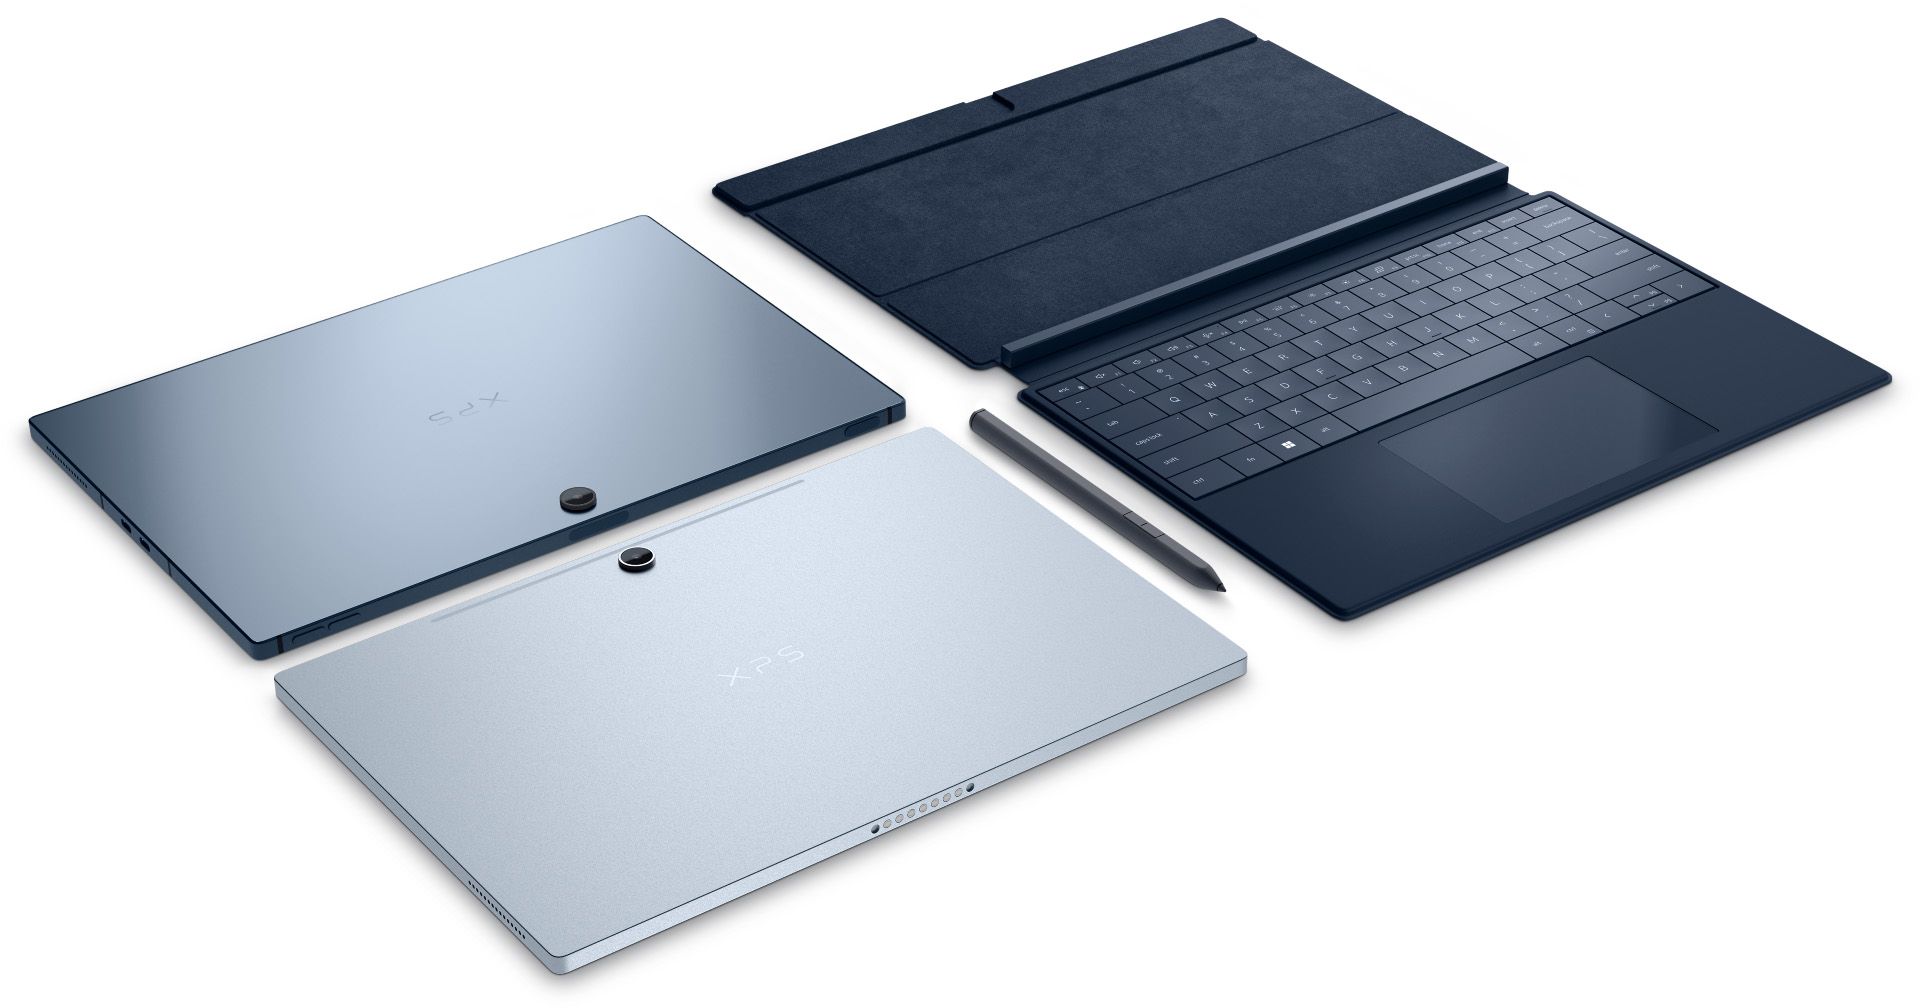 XPS 13 2-in-1 from front and back with keyboard and stylus